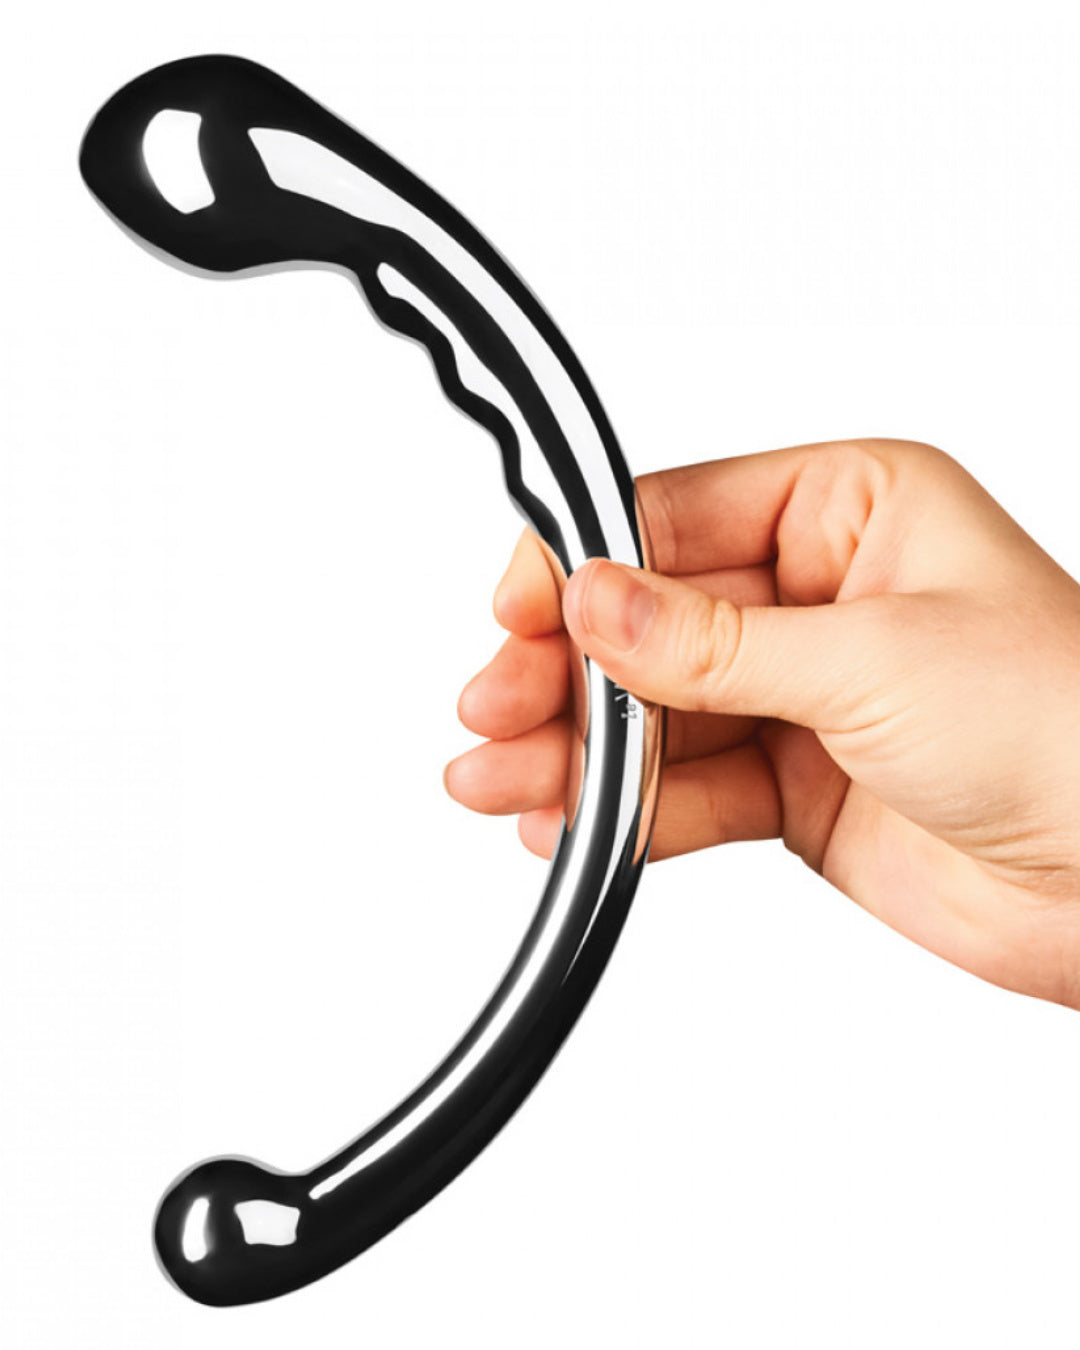 Le Wand Hoop Double Ended Stainless Steel Dildo held at the center by a person's hand to illustrate the size of the dildo